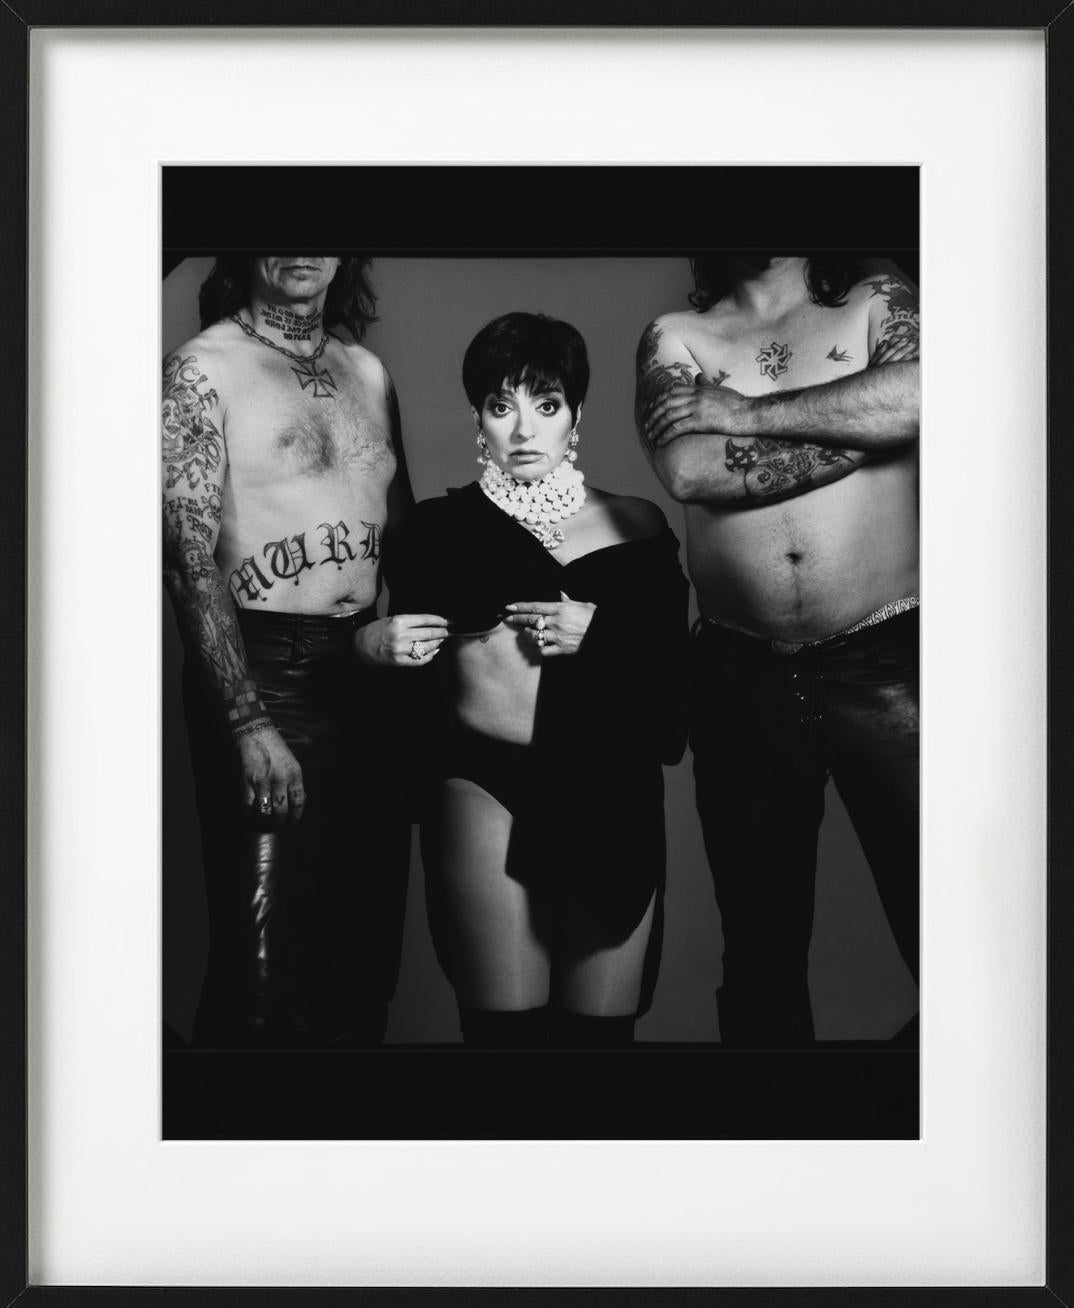 'Liza Minnelli' - in pearls posing with two men, fine art photography, 1996 - Black Black and White Photograph by Timothy White